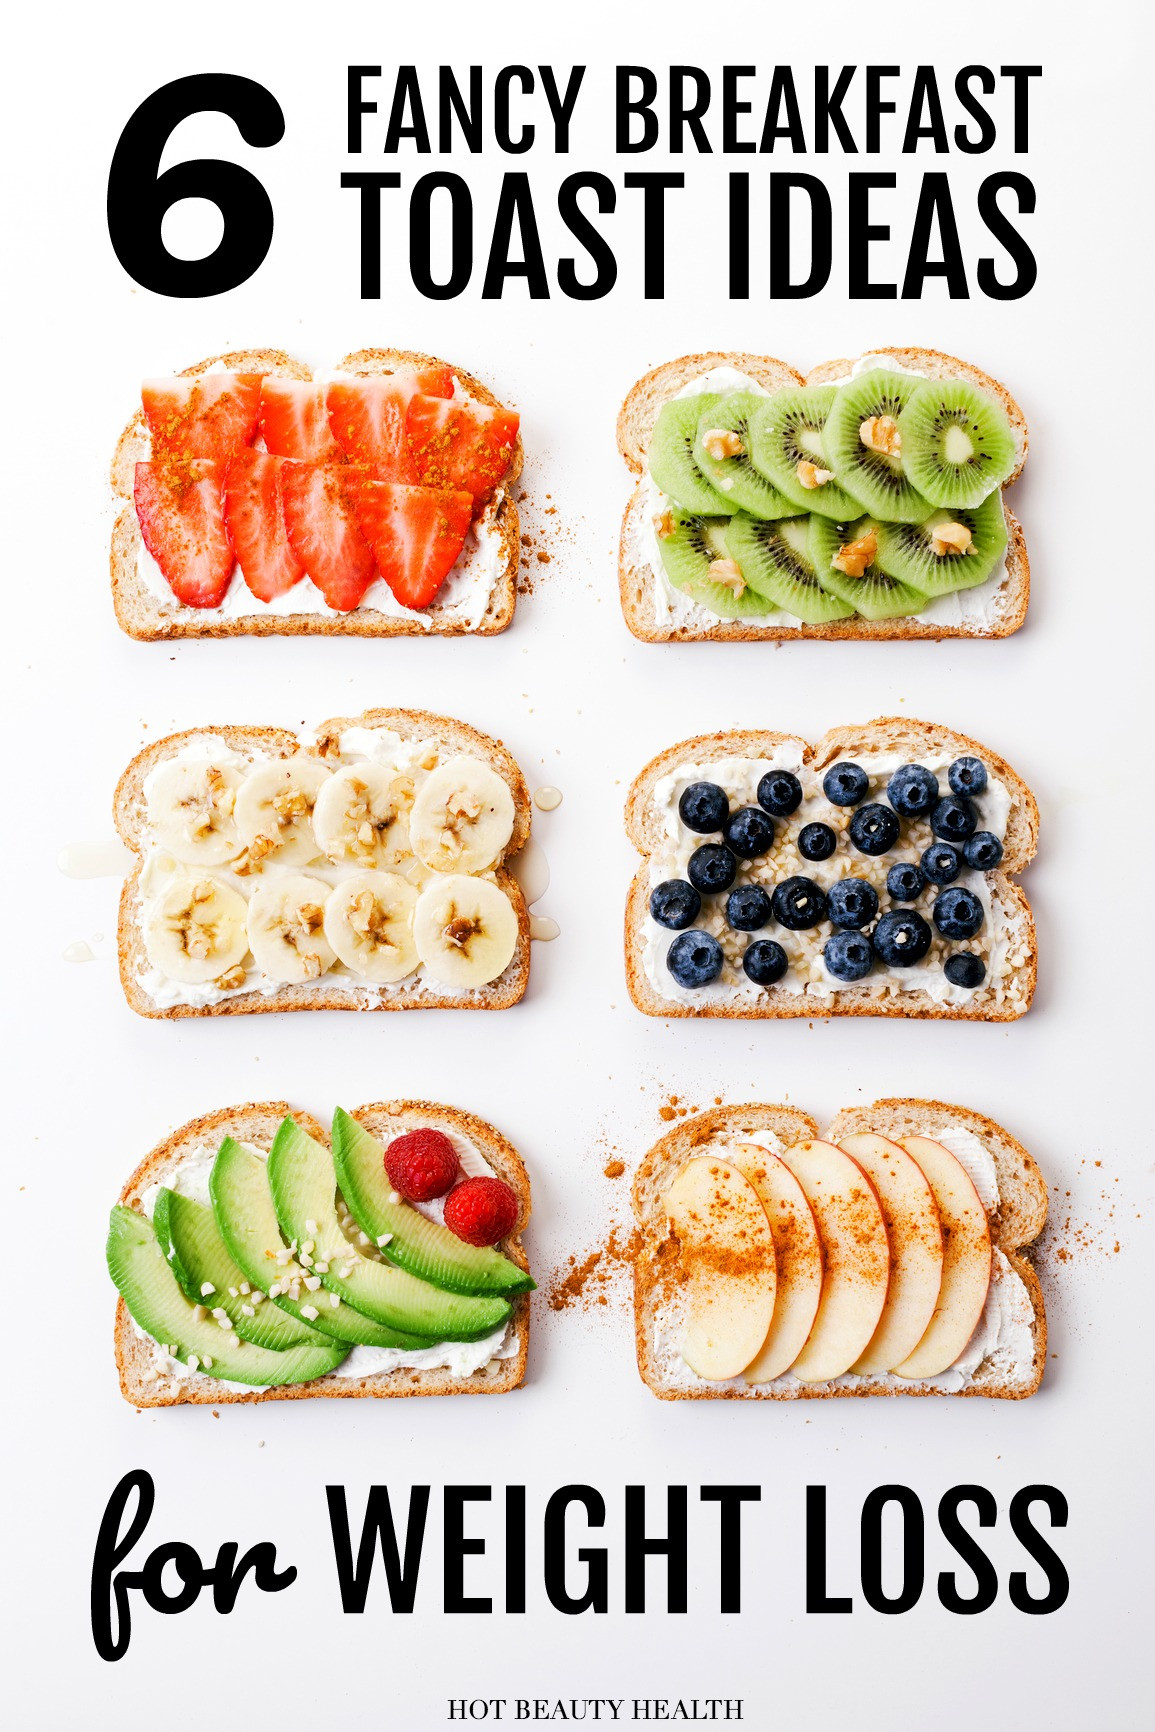 Easy Healthy Breakfast For Weight Loss
 6 Easy & Creative Ways to Fancy Up Breakfast Toasts Hot